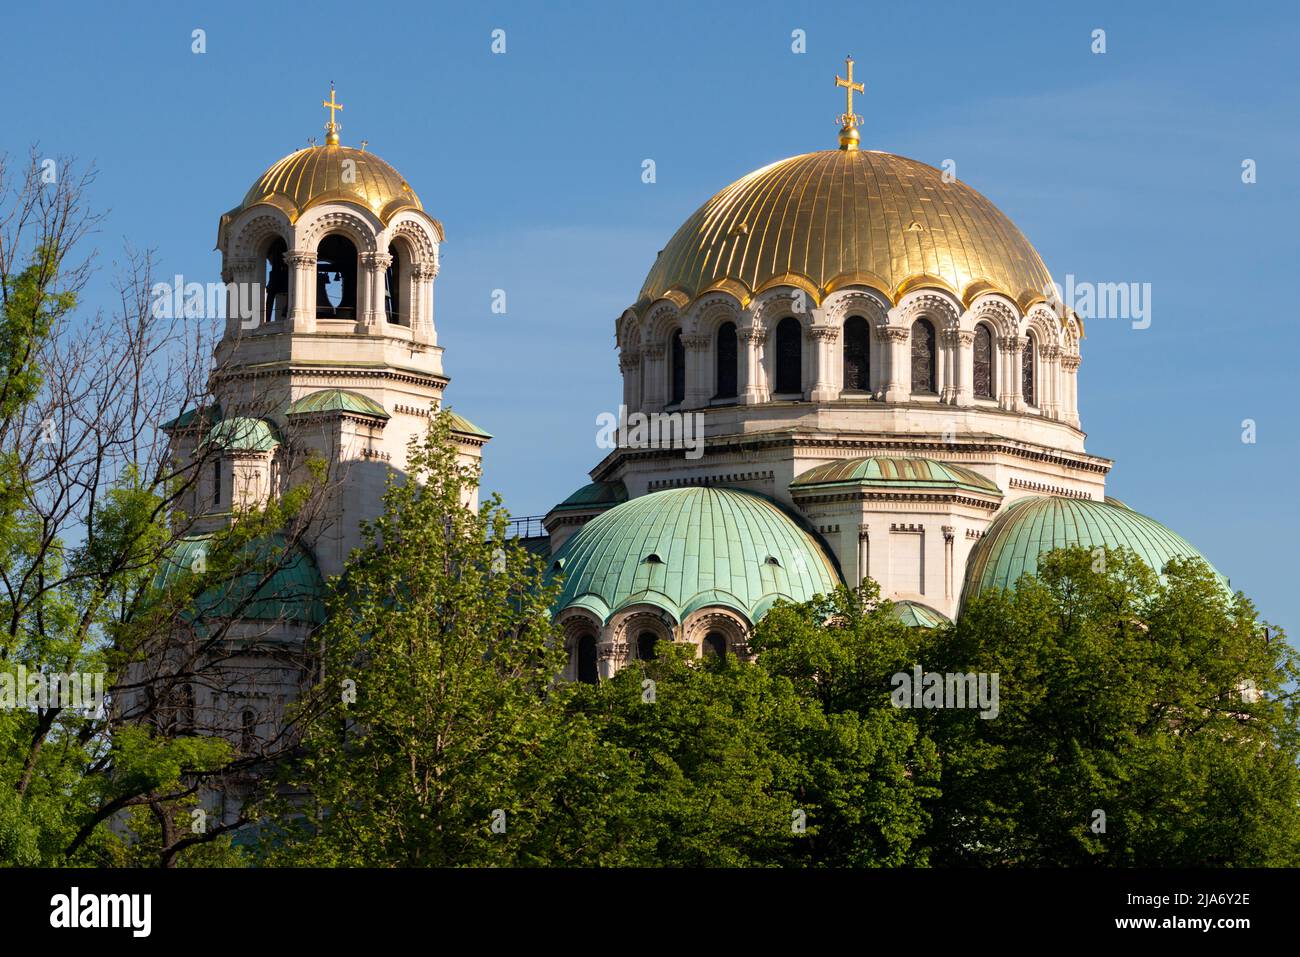 Golden domes architectural detail of Sv. Alexander Nevsky Orthodox Cathedral in Sofia, Bulgaria, Balkans, Europe Stock Photo